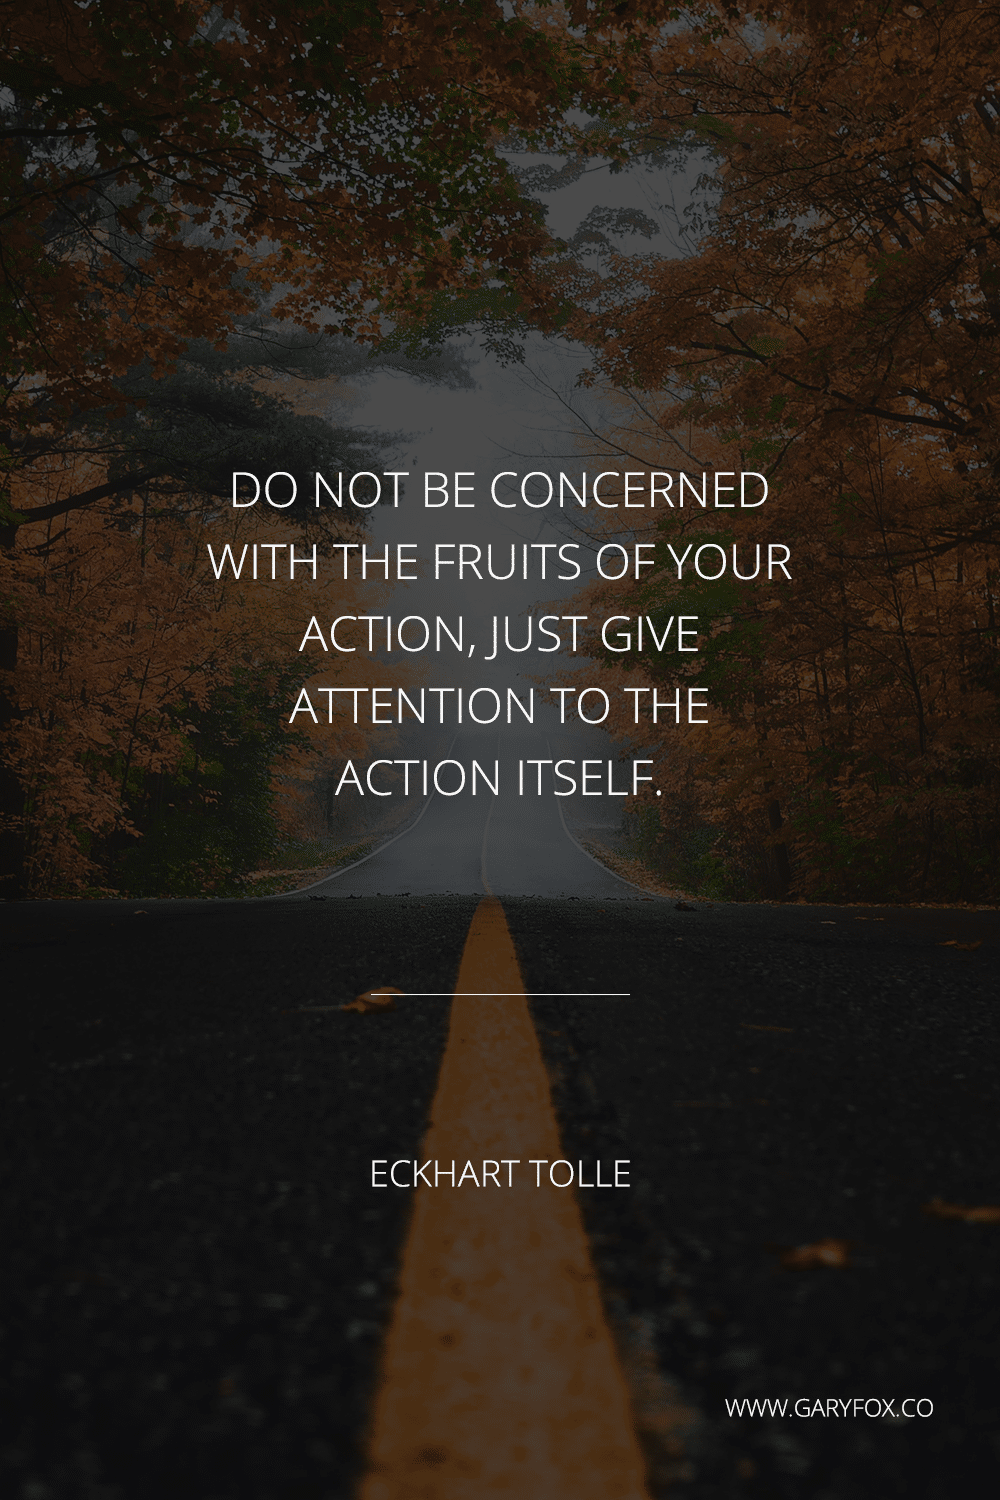 Do Not Be Concerned With The Fruits Of Your Action, Just Give Attention To The Action Itself. - Eckhart Tolle